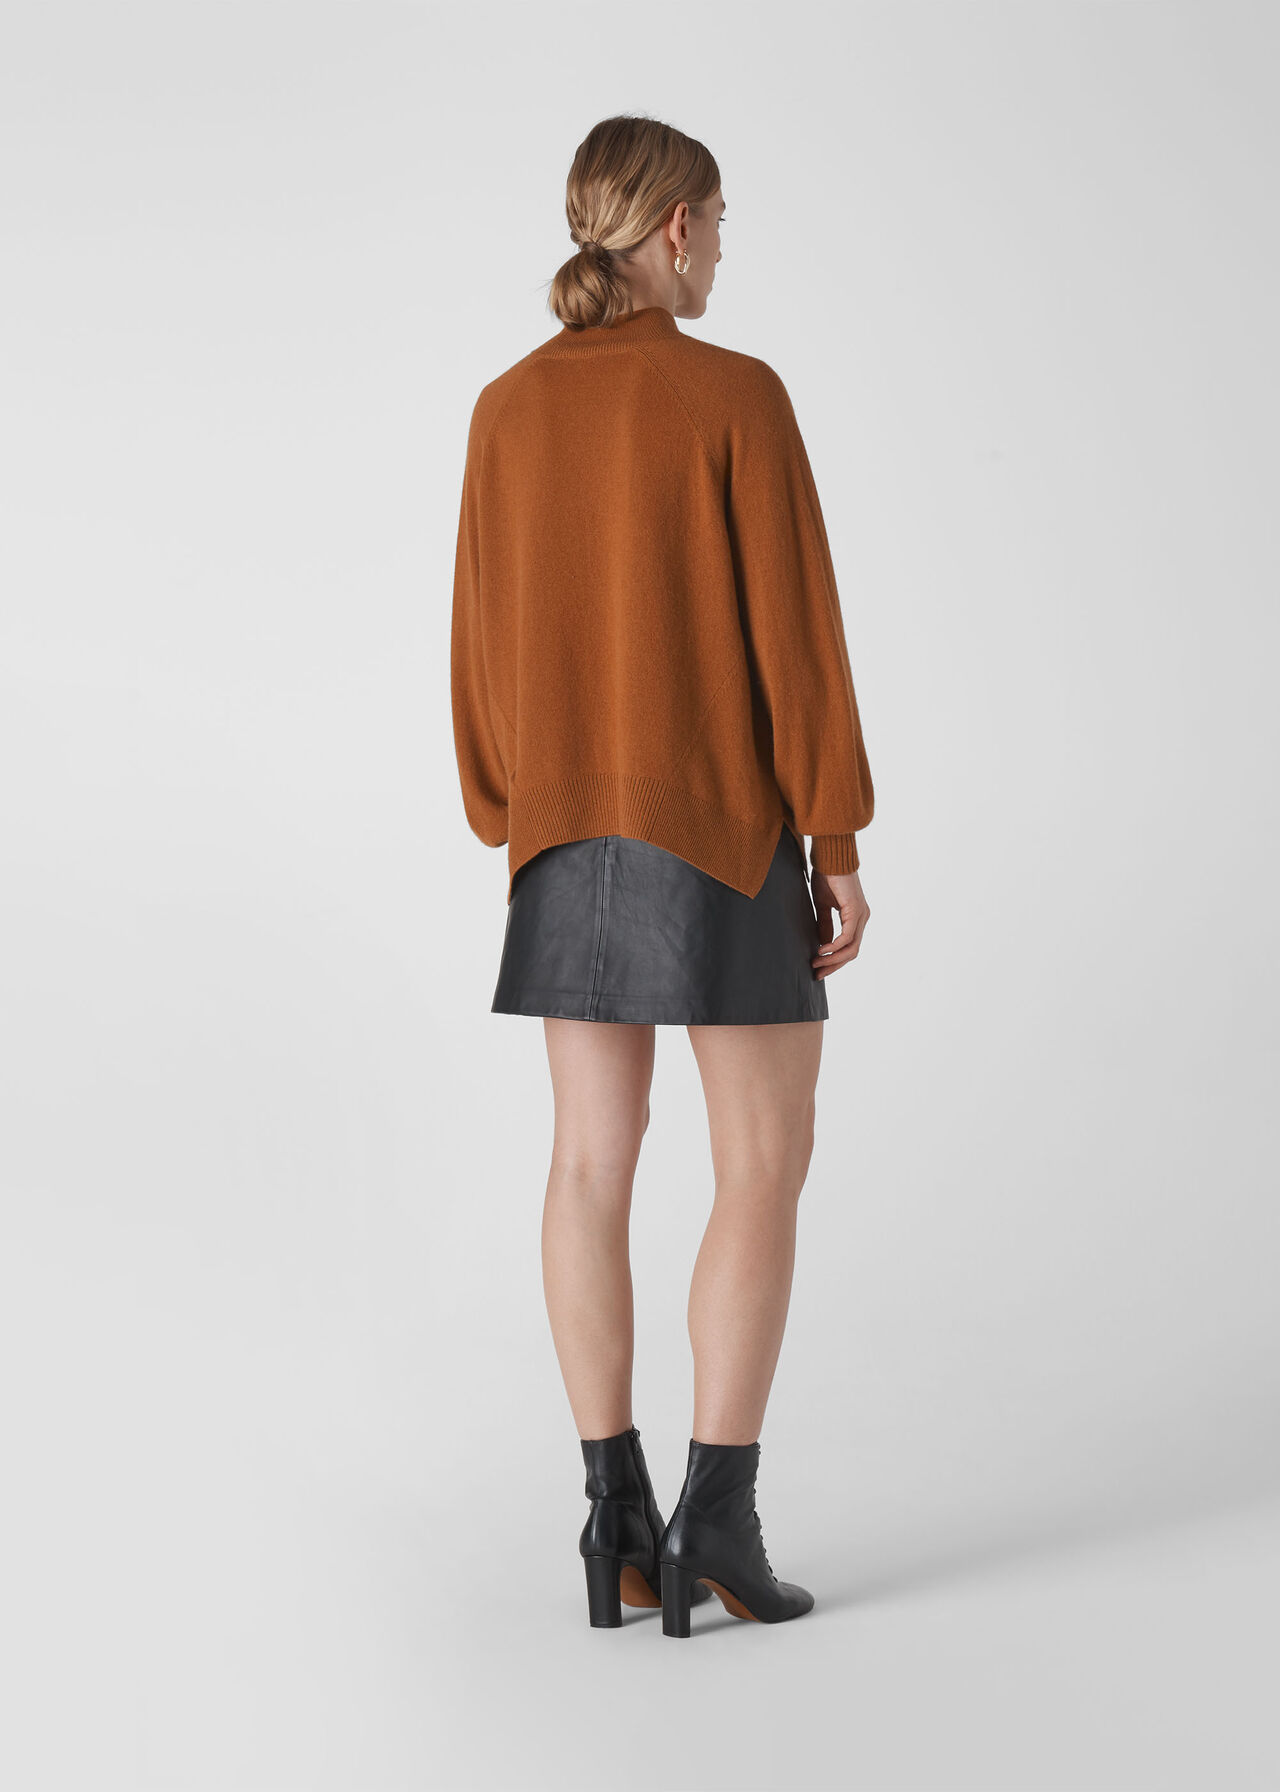 Funnel Neck Cashmere Knit Toffee